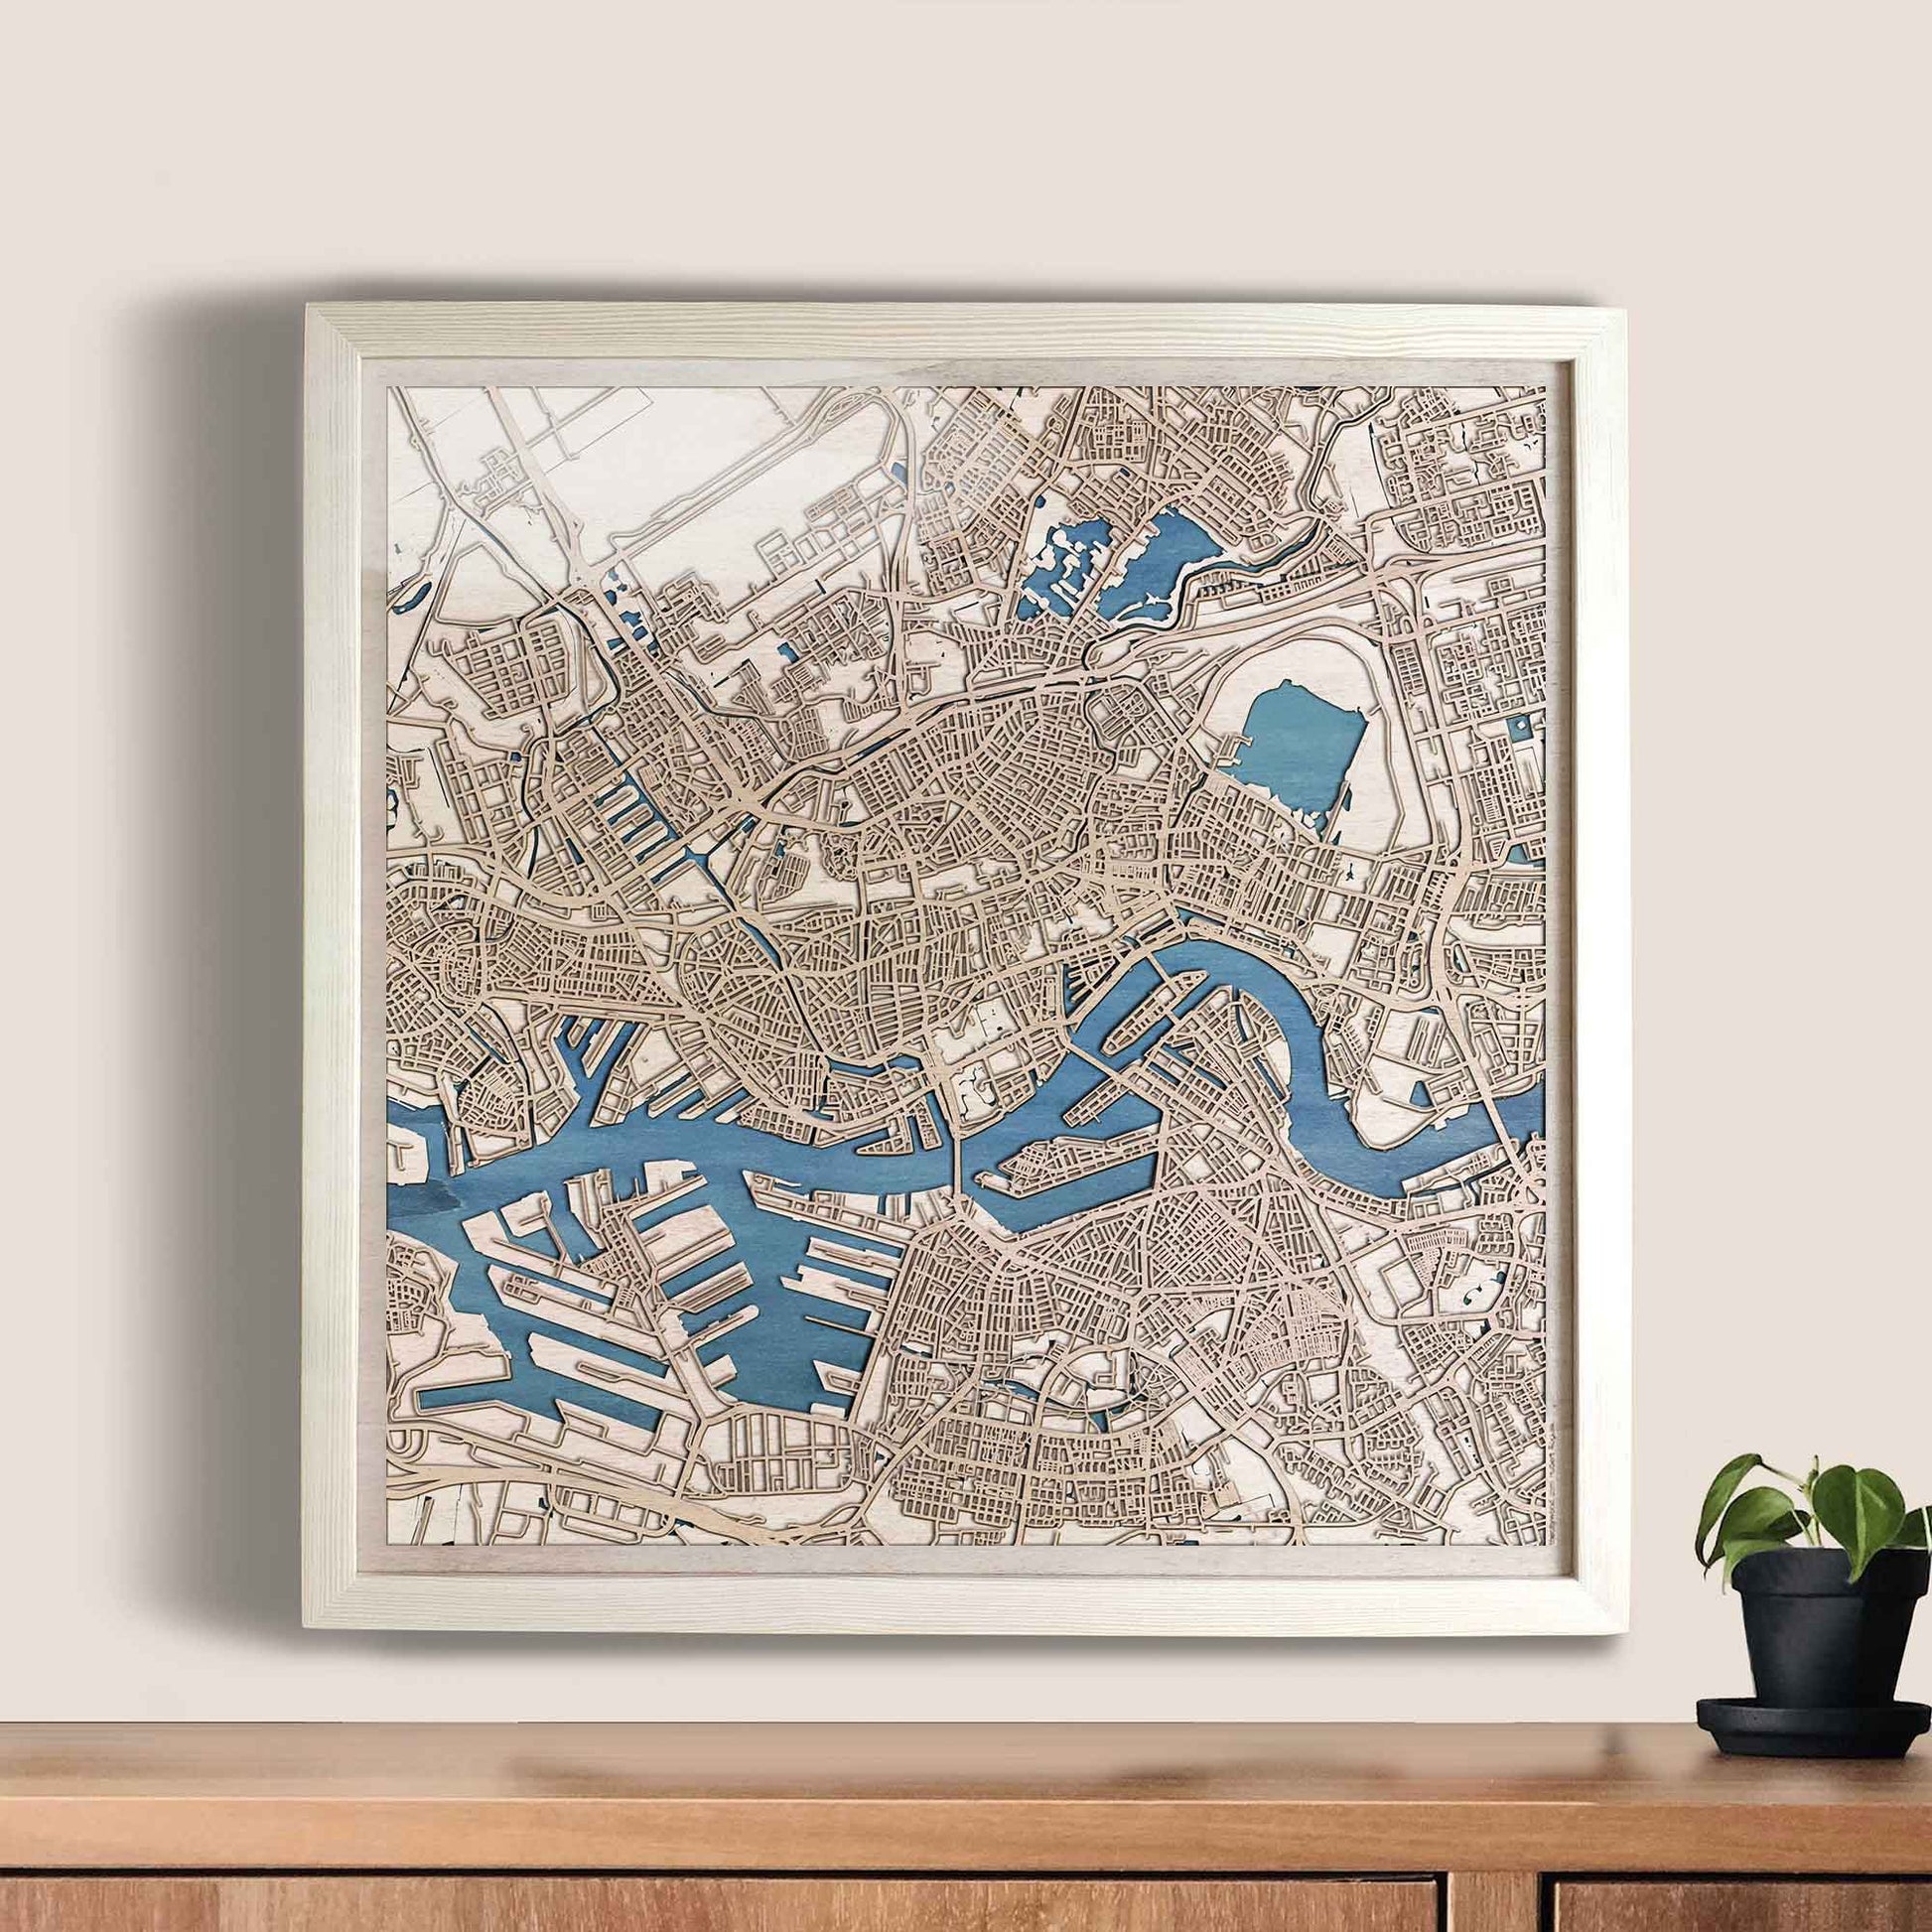 Rotterdam Wooden Map by CityWood - Custom Wood Map Art - Unique Laser Cut Engraved - Anniversary Gift